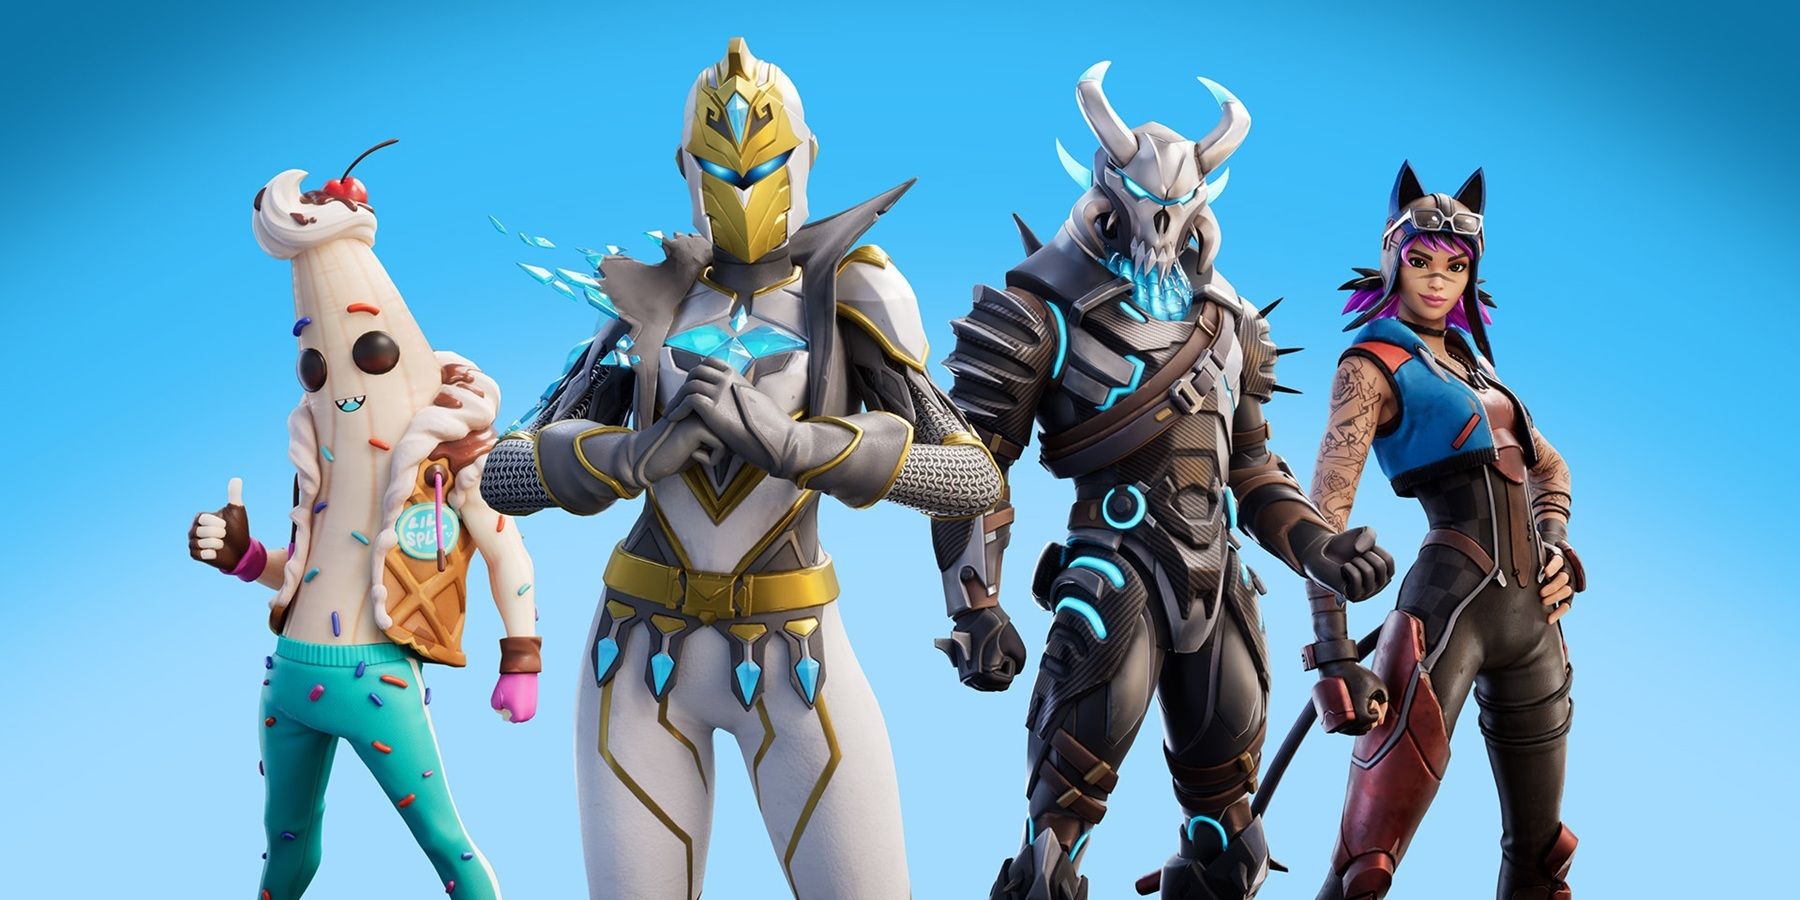 Epic Games rolls out limited accounts to protect young 'Fortnite